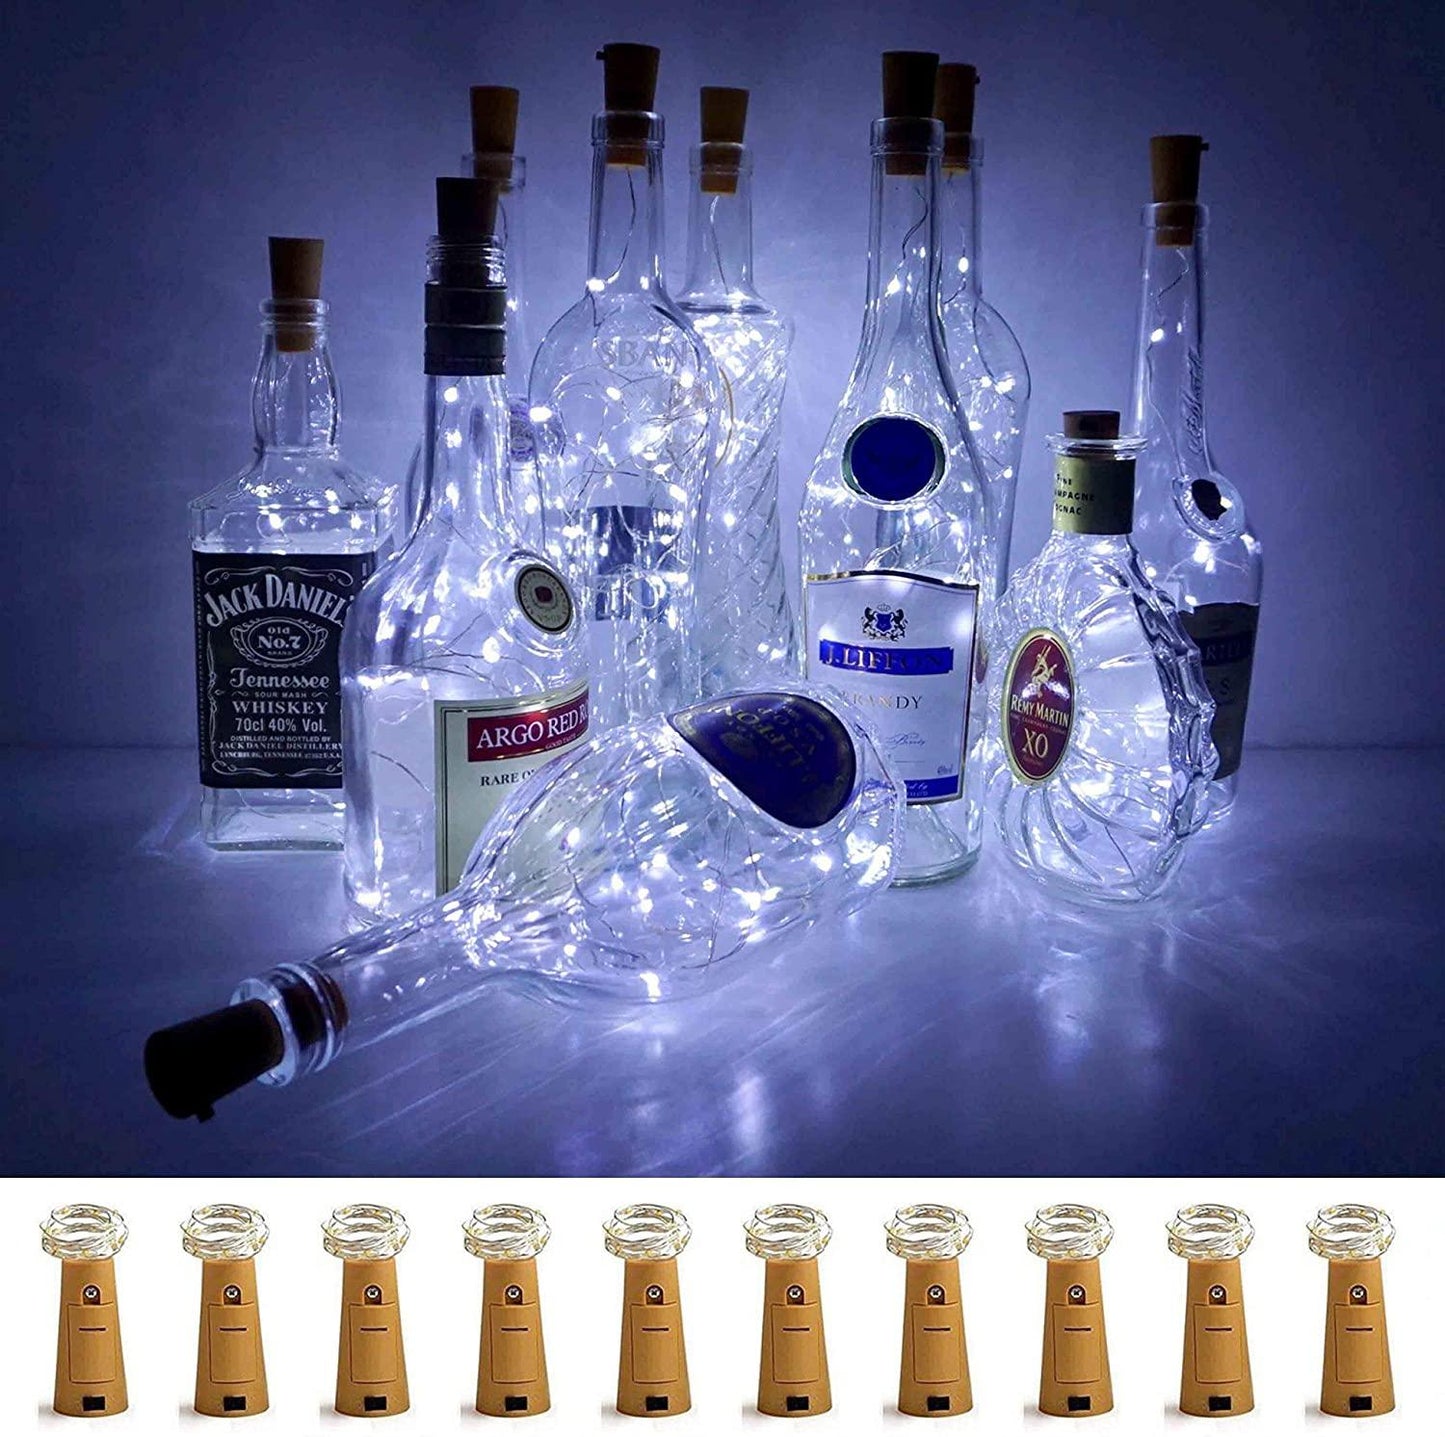 Cork Lights for Wine Bottles Battery Operated Copper Wire Micro Starry String Lights for Jars DIY Crafts - If you say i do